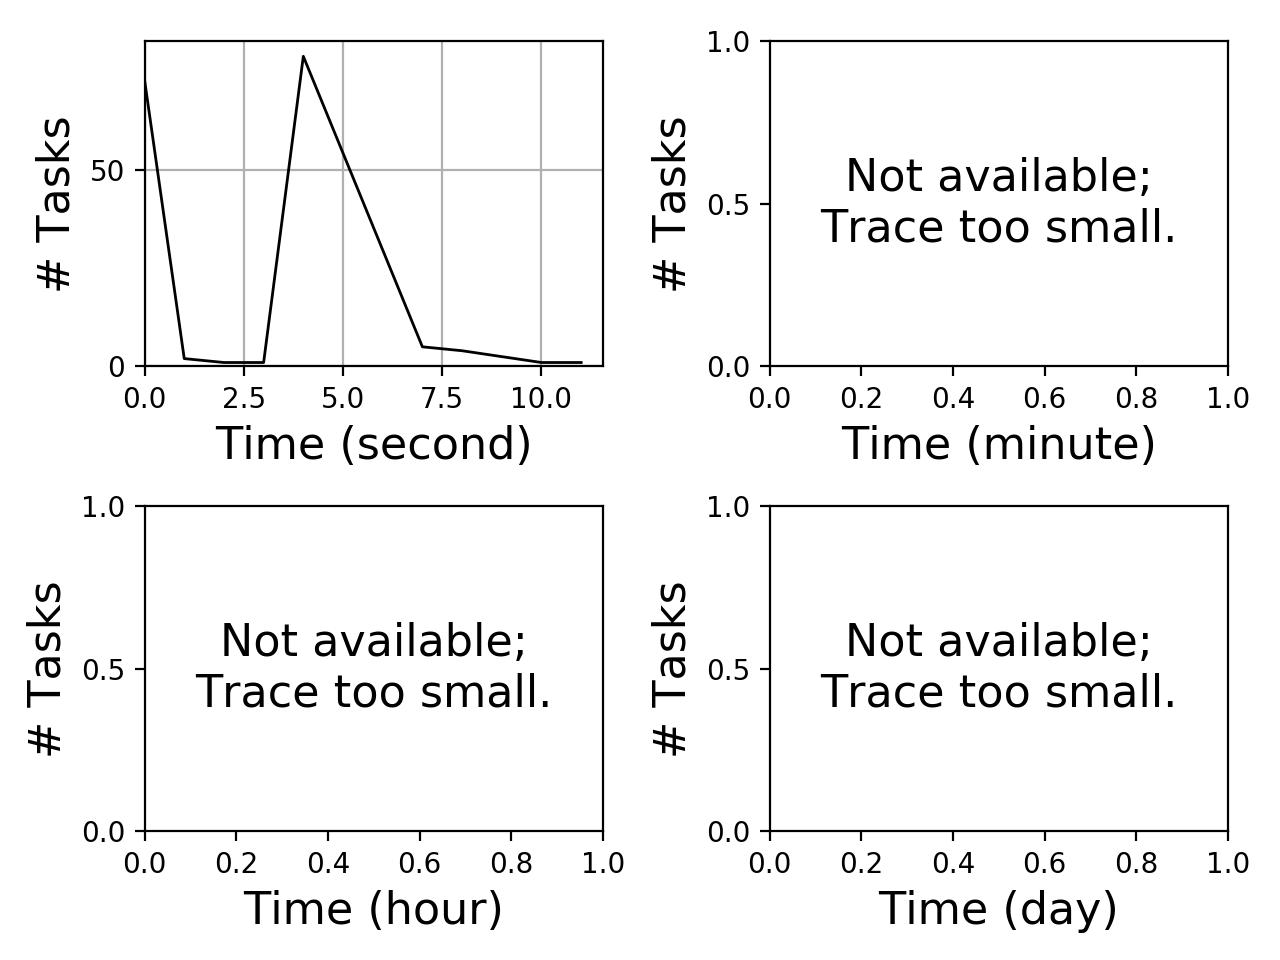 Task arrival graph for the Pegasus_P1 trace.